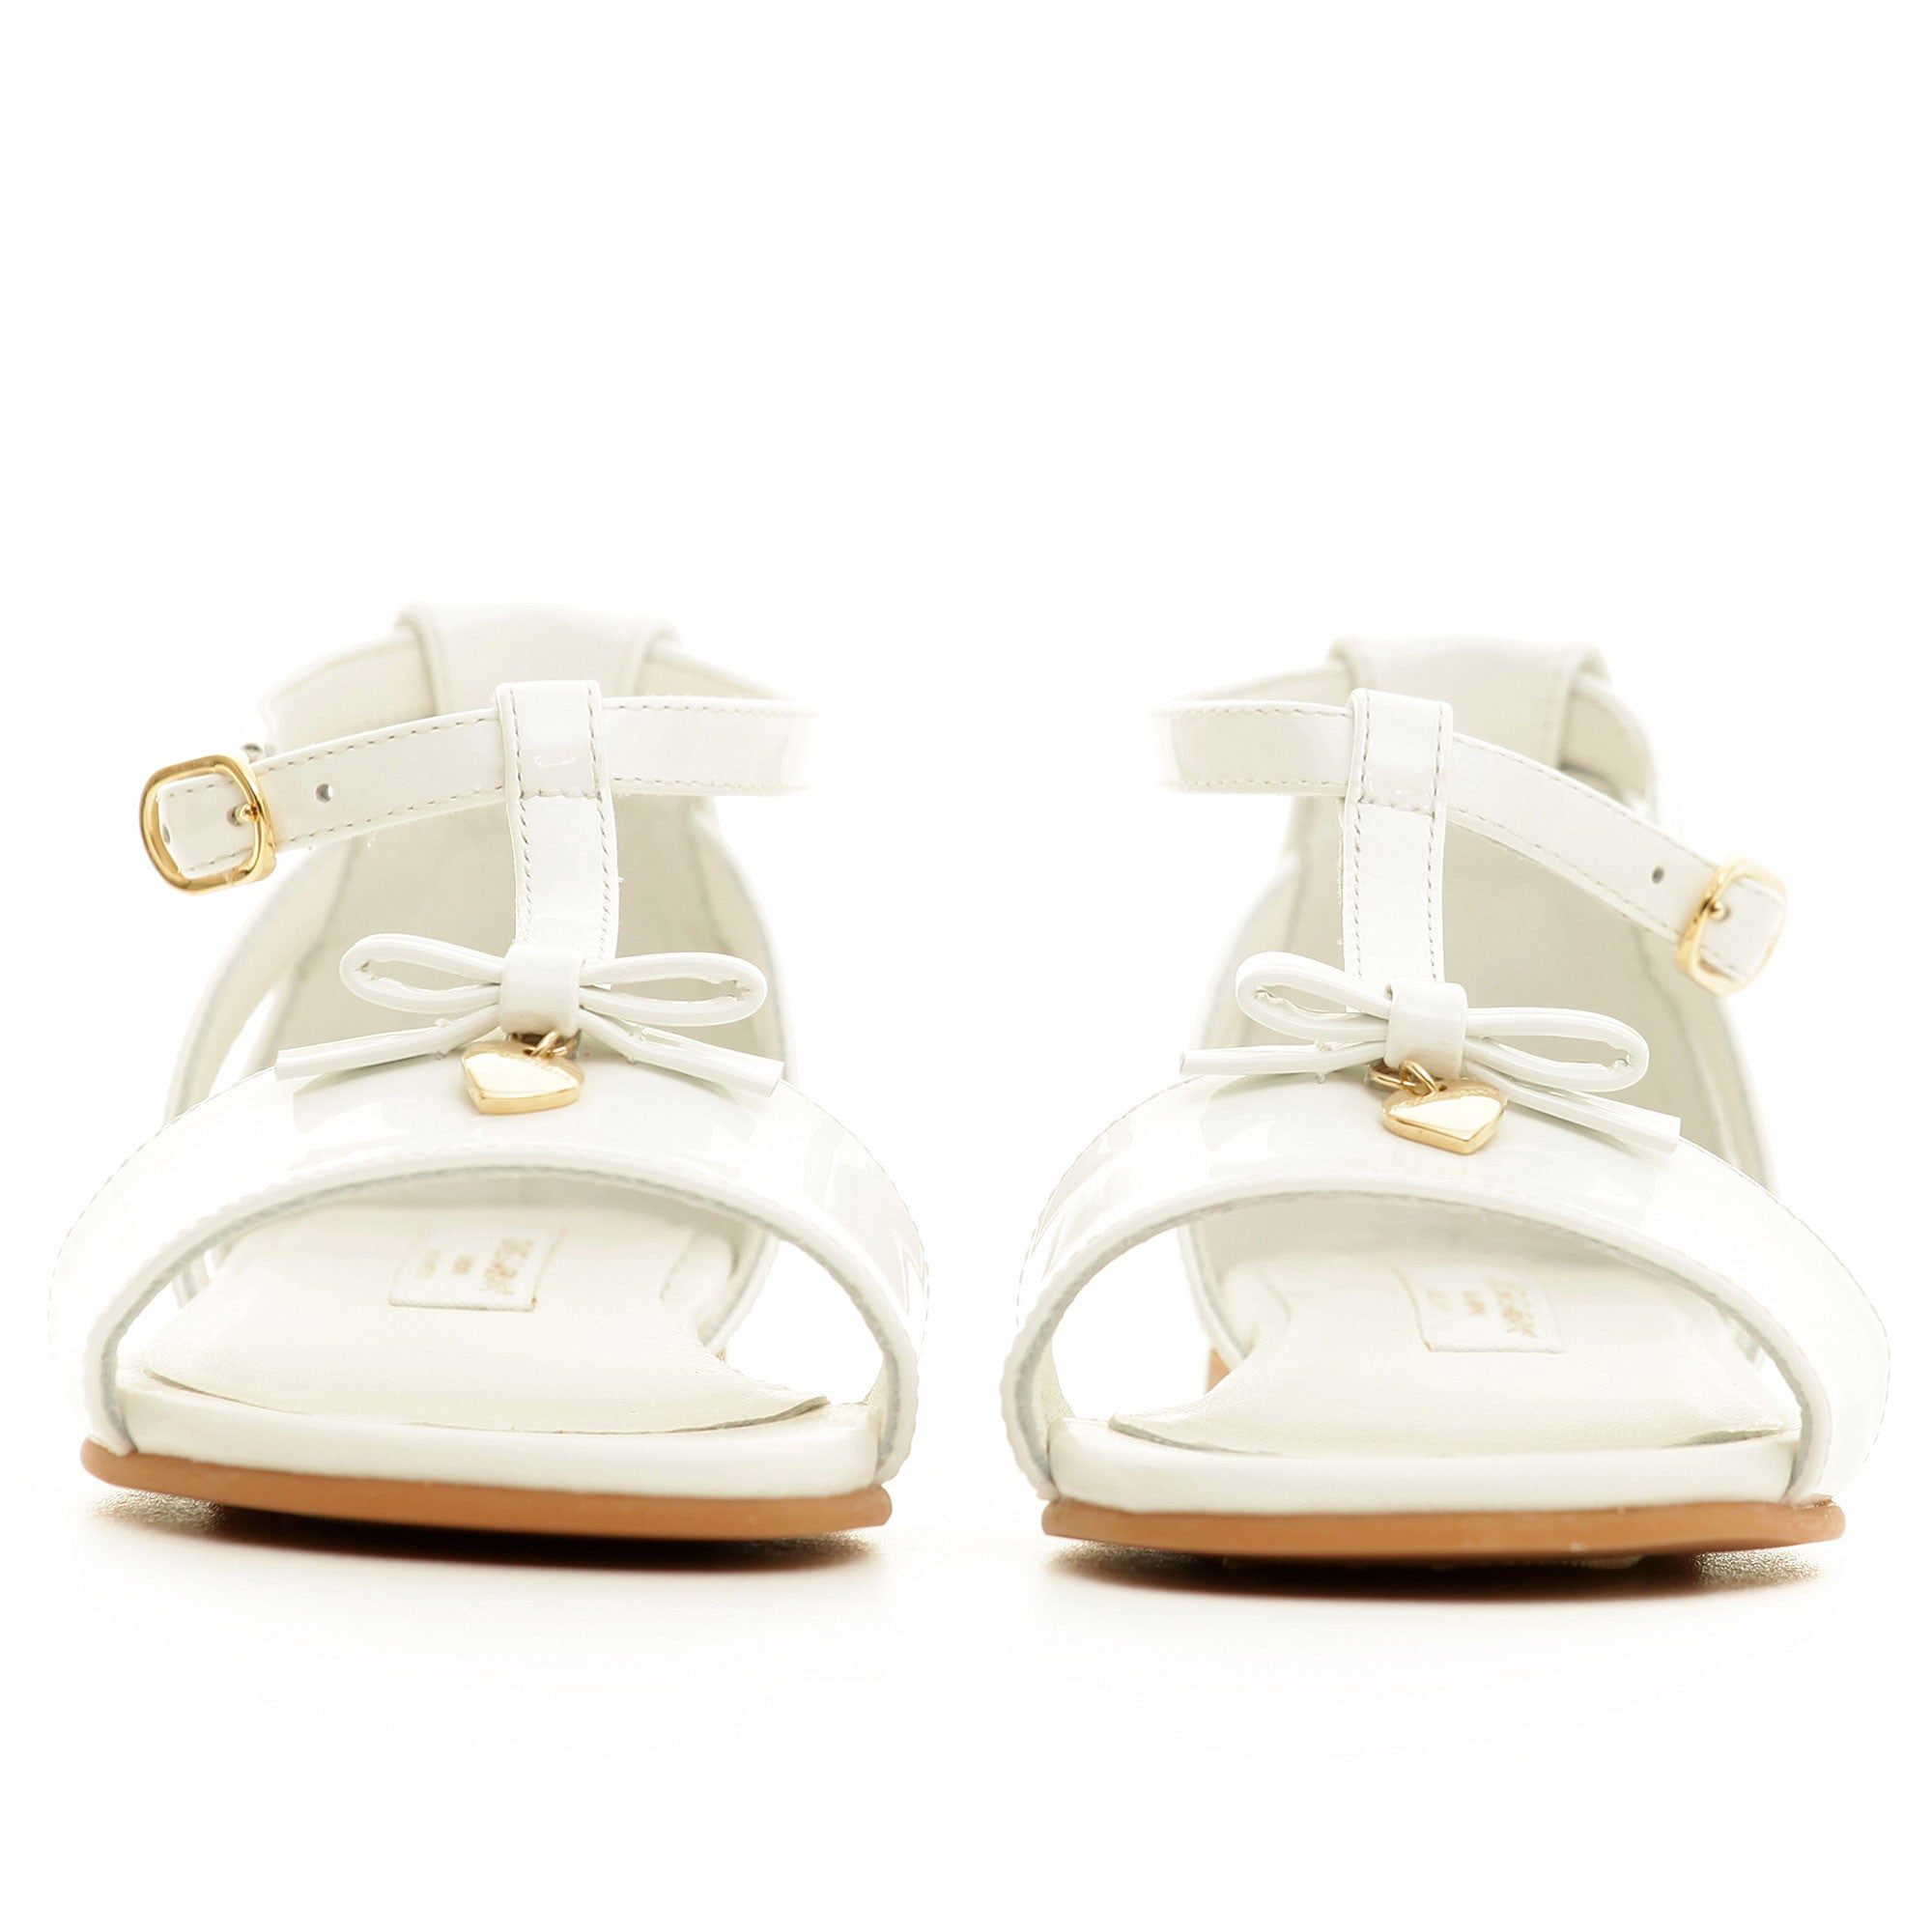 Girls Ivory Leateher Sandal With Gold Metal Heart Trims - CÉMAROSE | Children's Fashion Store - 2